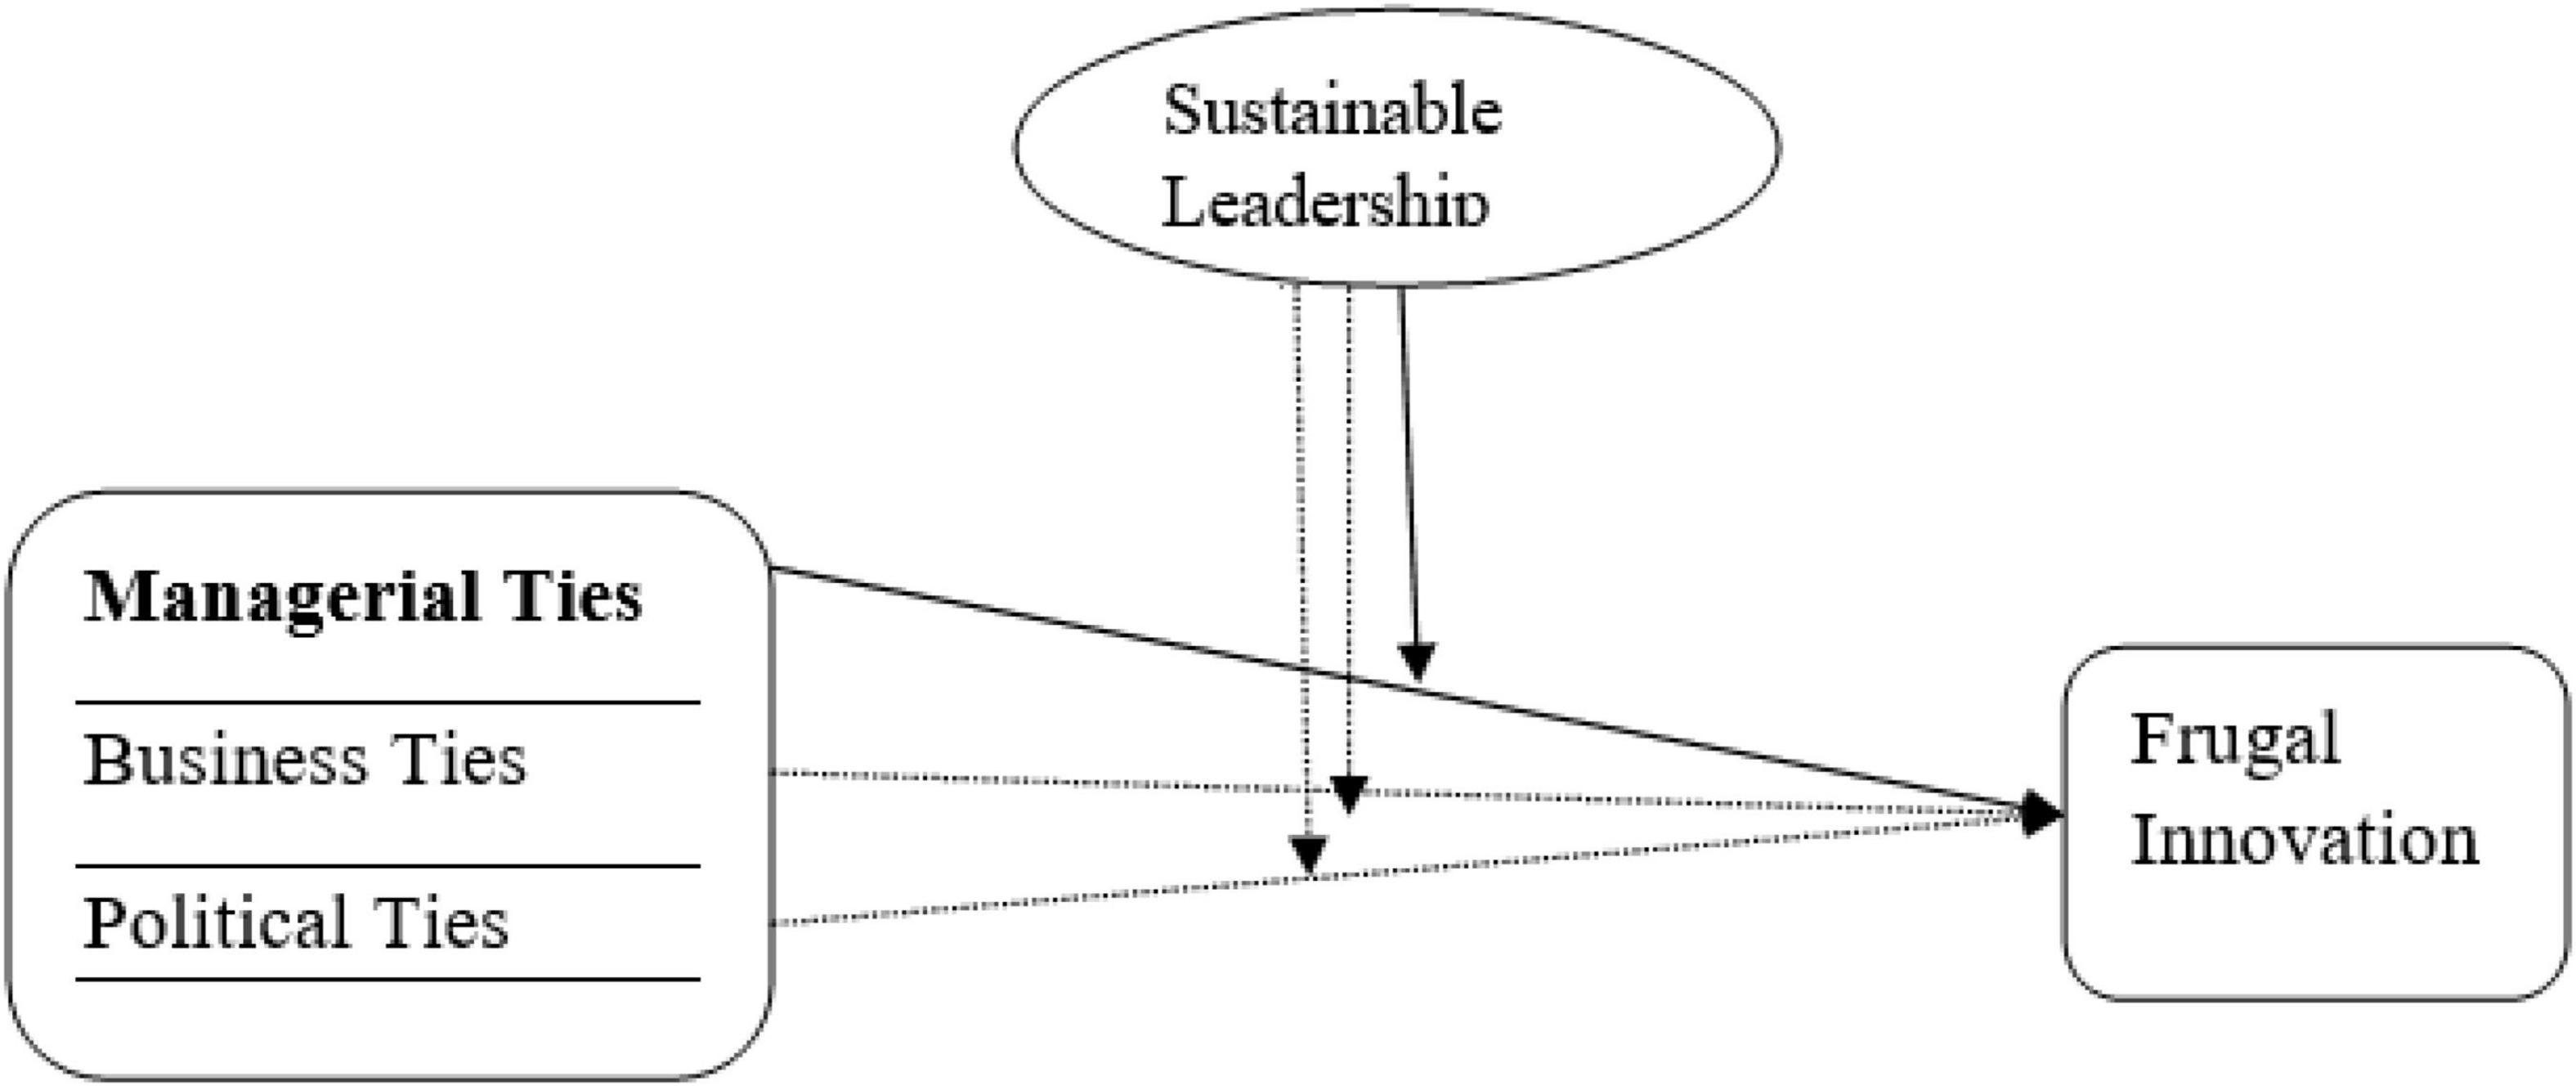 Covariance between innovation sources, and their relationships with